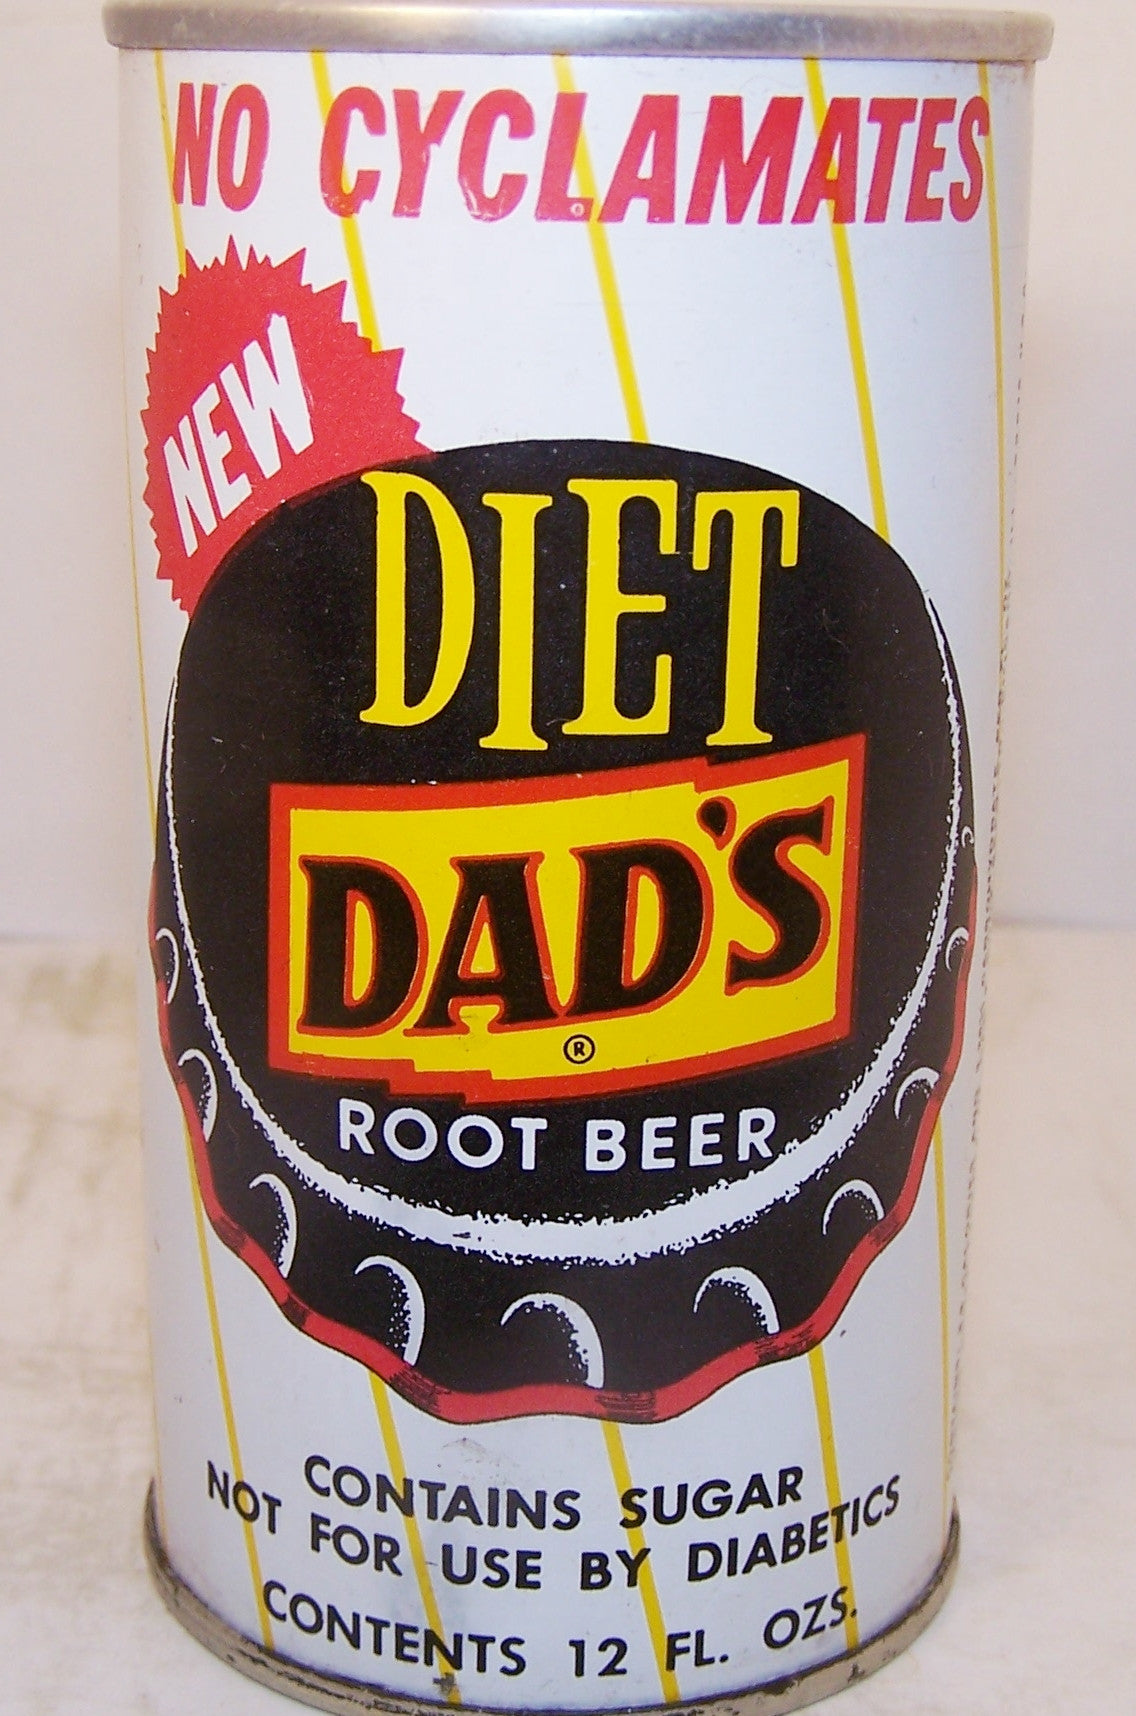 Dad's Diet Root Beer, 2007 soda can book page 144 Grade 1/1+